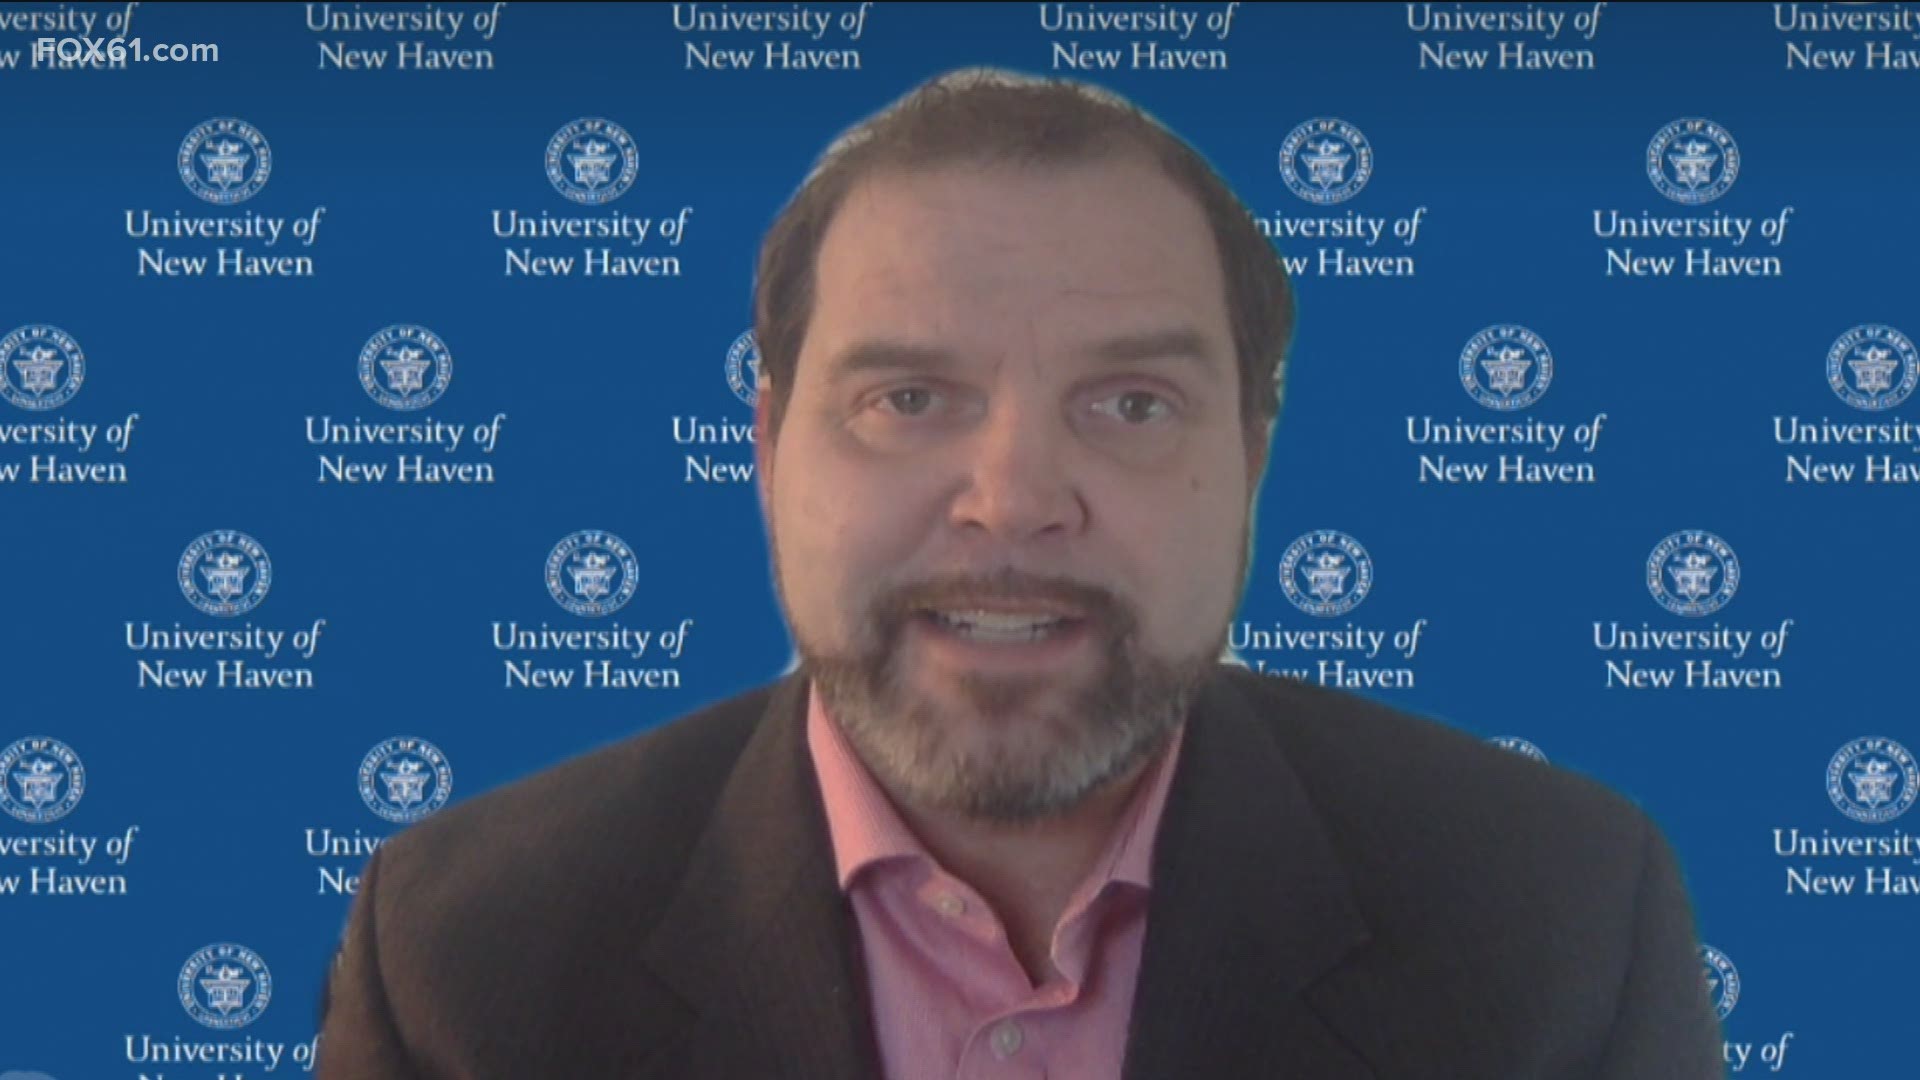 Dr. Matthew Schmidt is an associate professor of National Security and Political Science at University of New Haven.